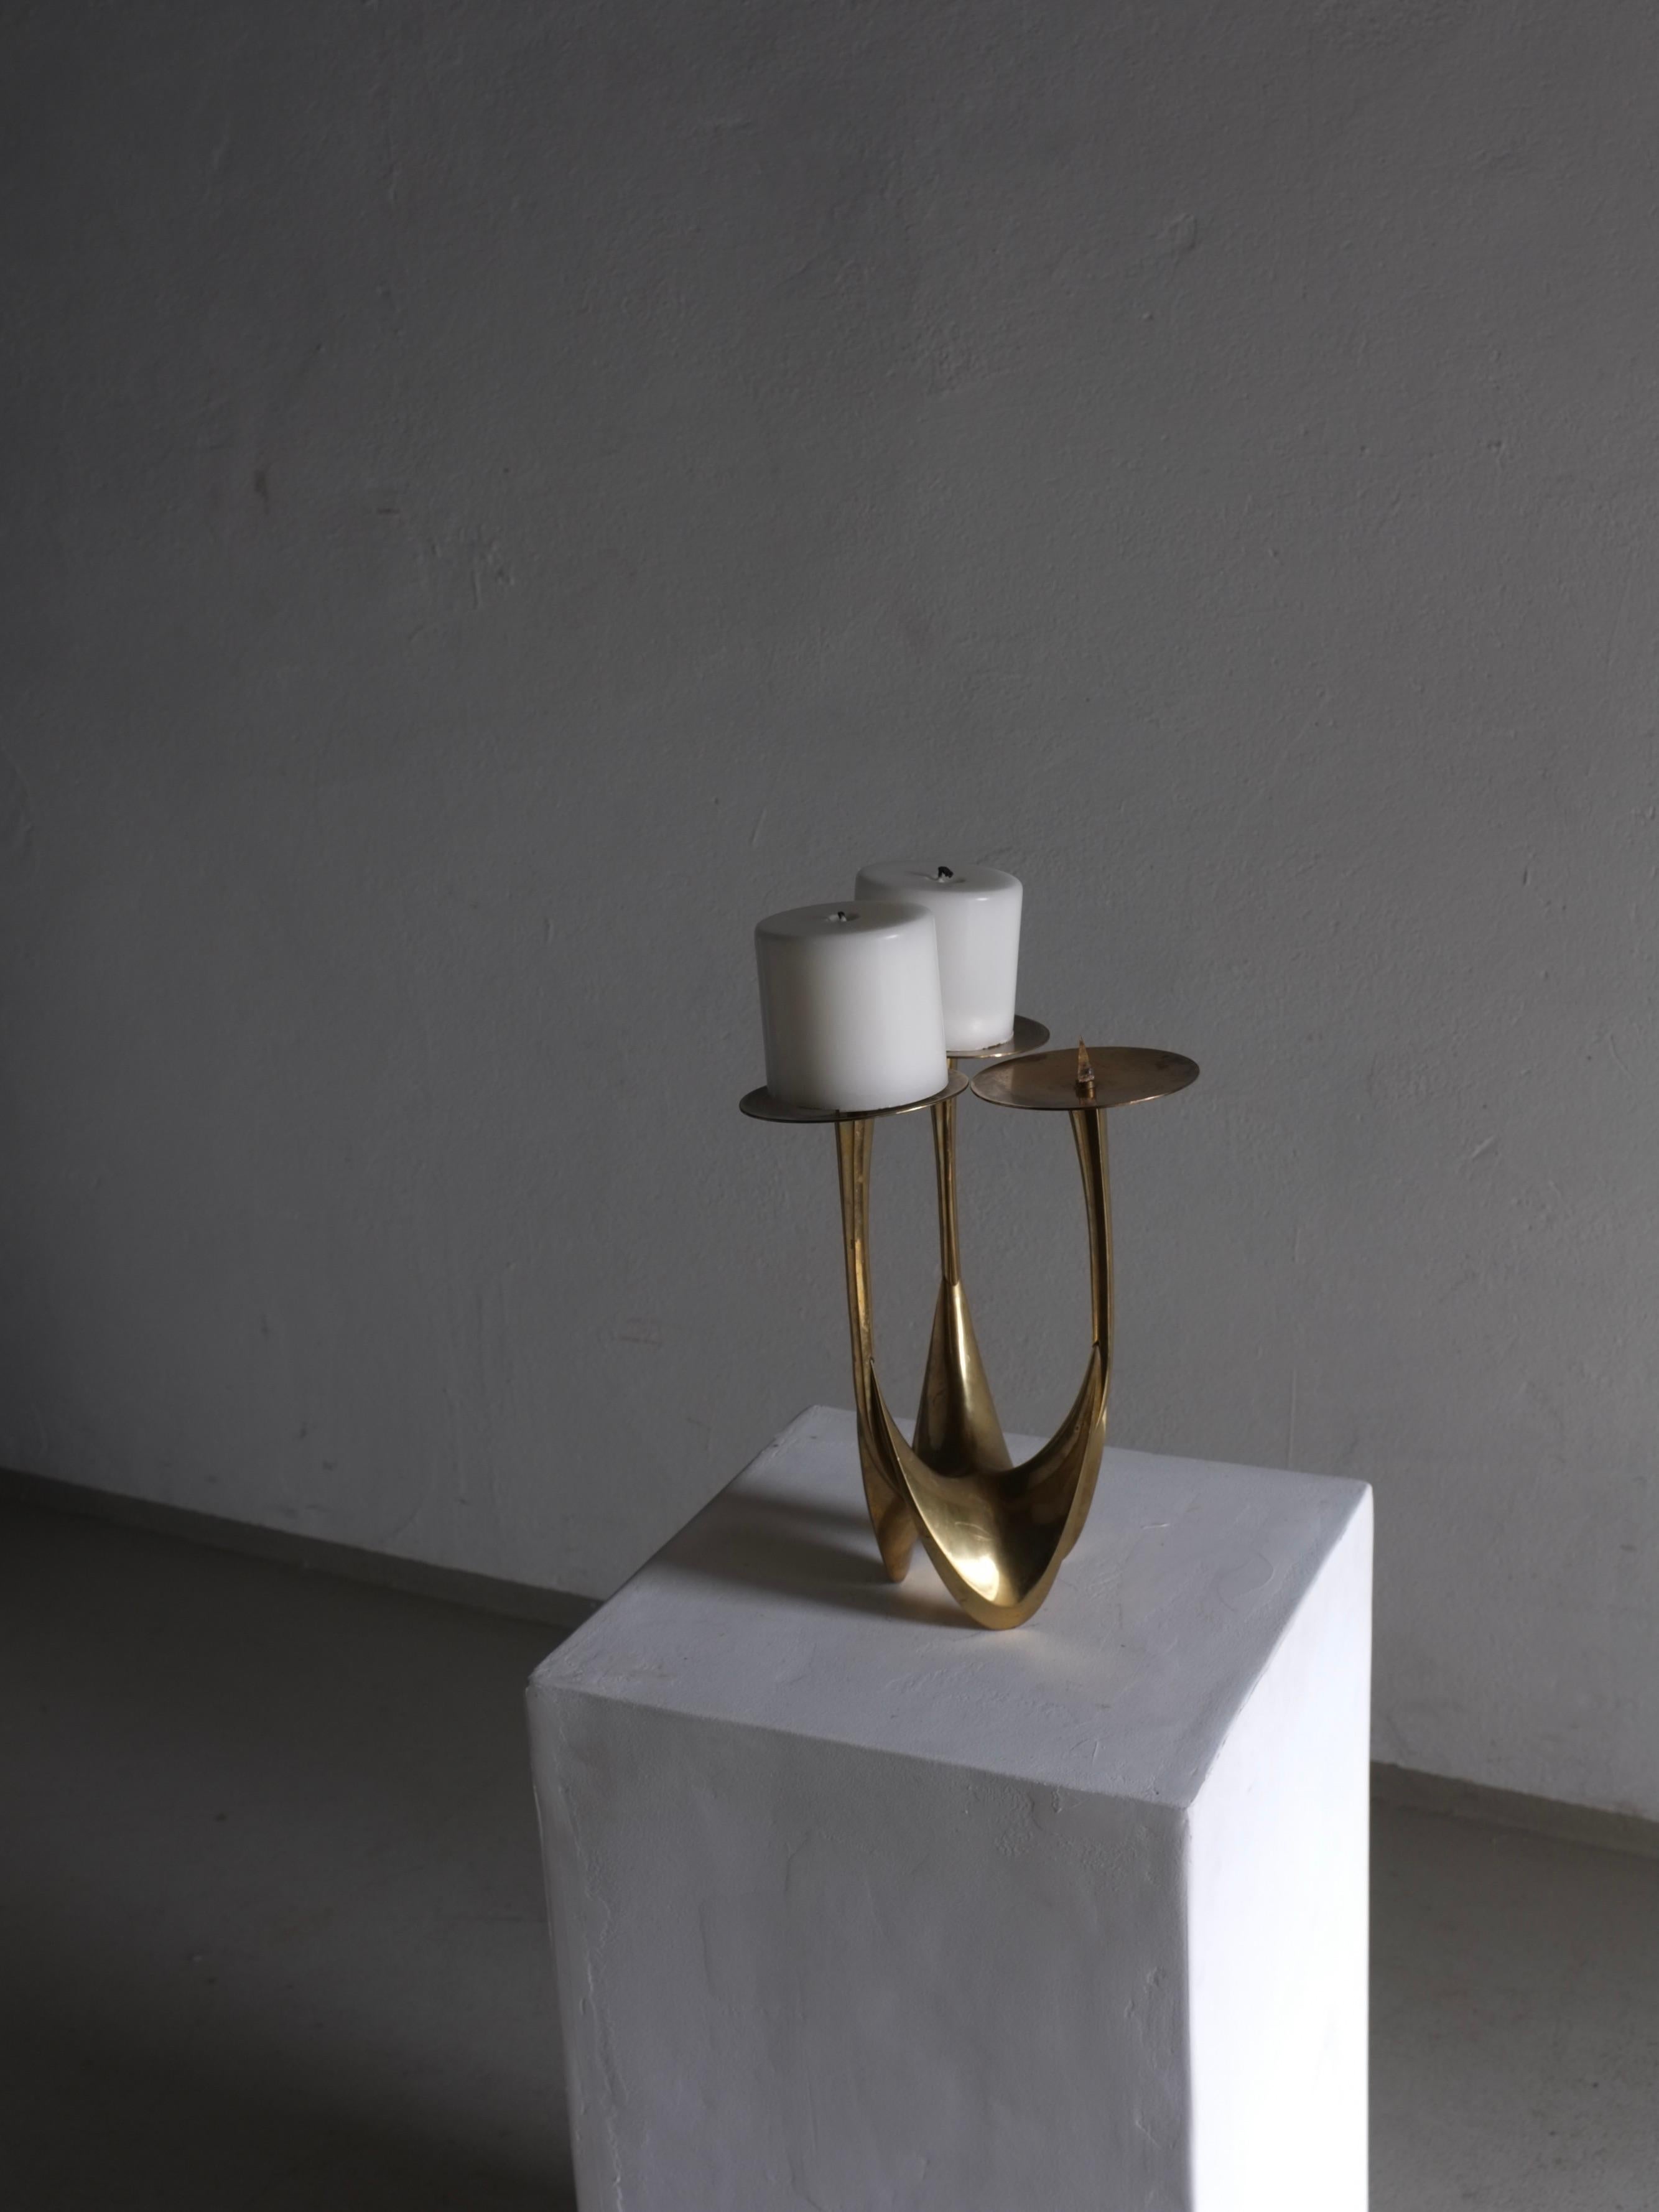 20th Century Brutalist Brass Candle Holder by Klaus Ullrich, Faber and Schumacher, 1950s For Sale